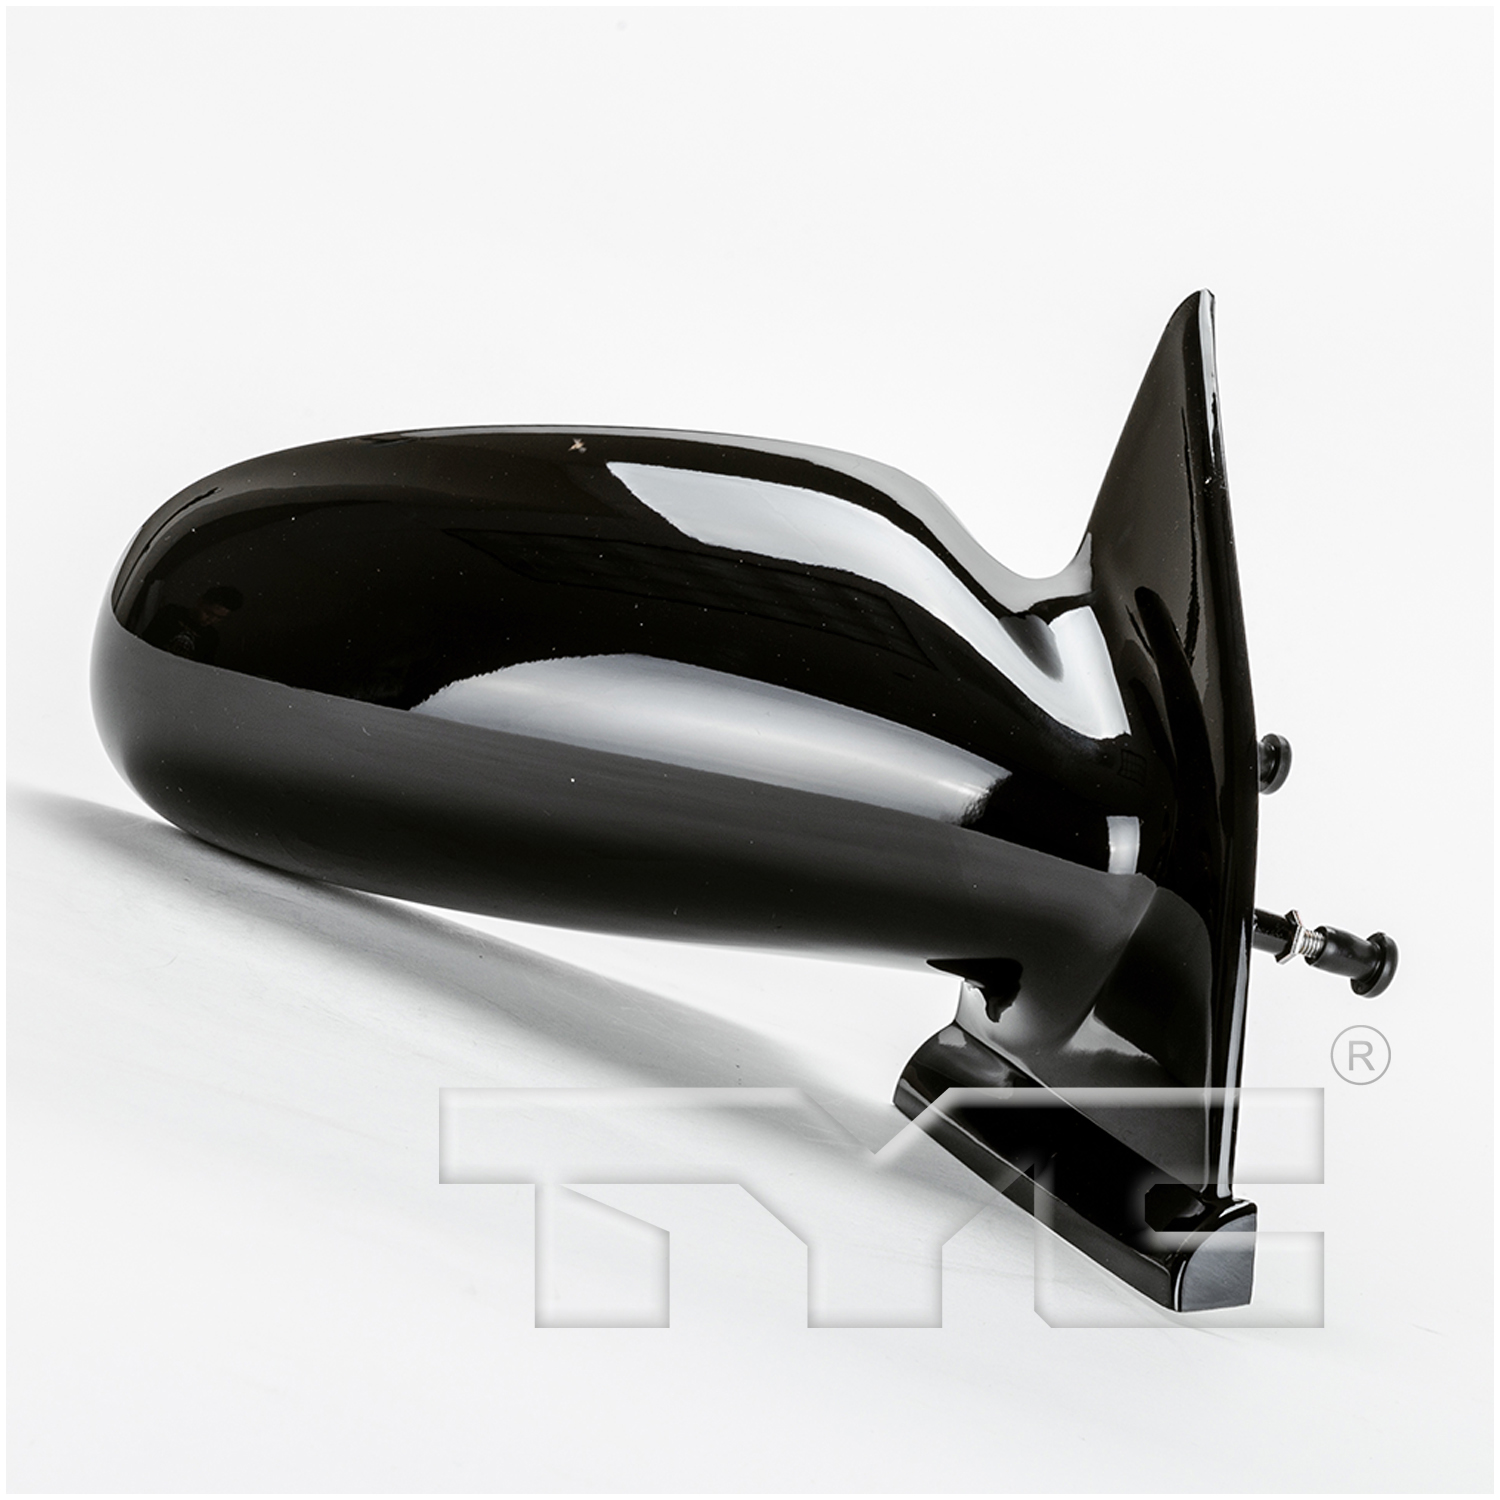 Aftermarket MIRRORS for SATURN - SW2, SW2,96-01,RT Mirror outside rear view